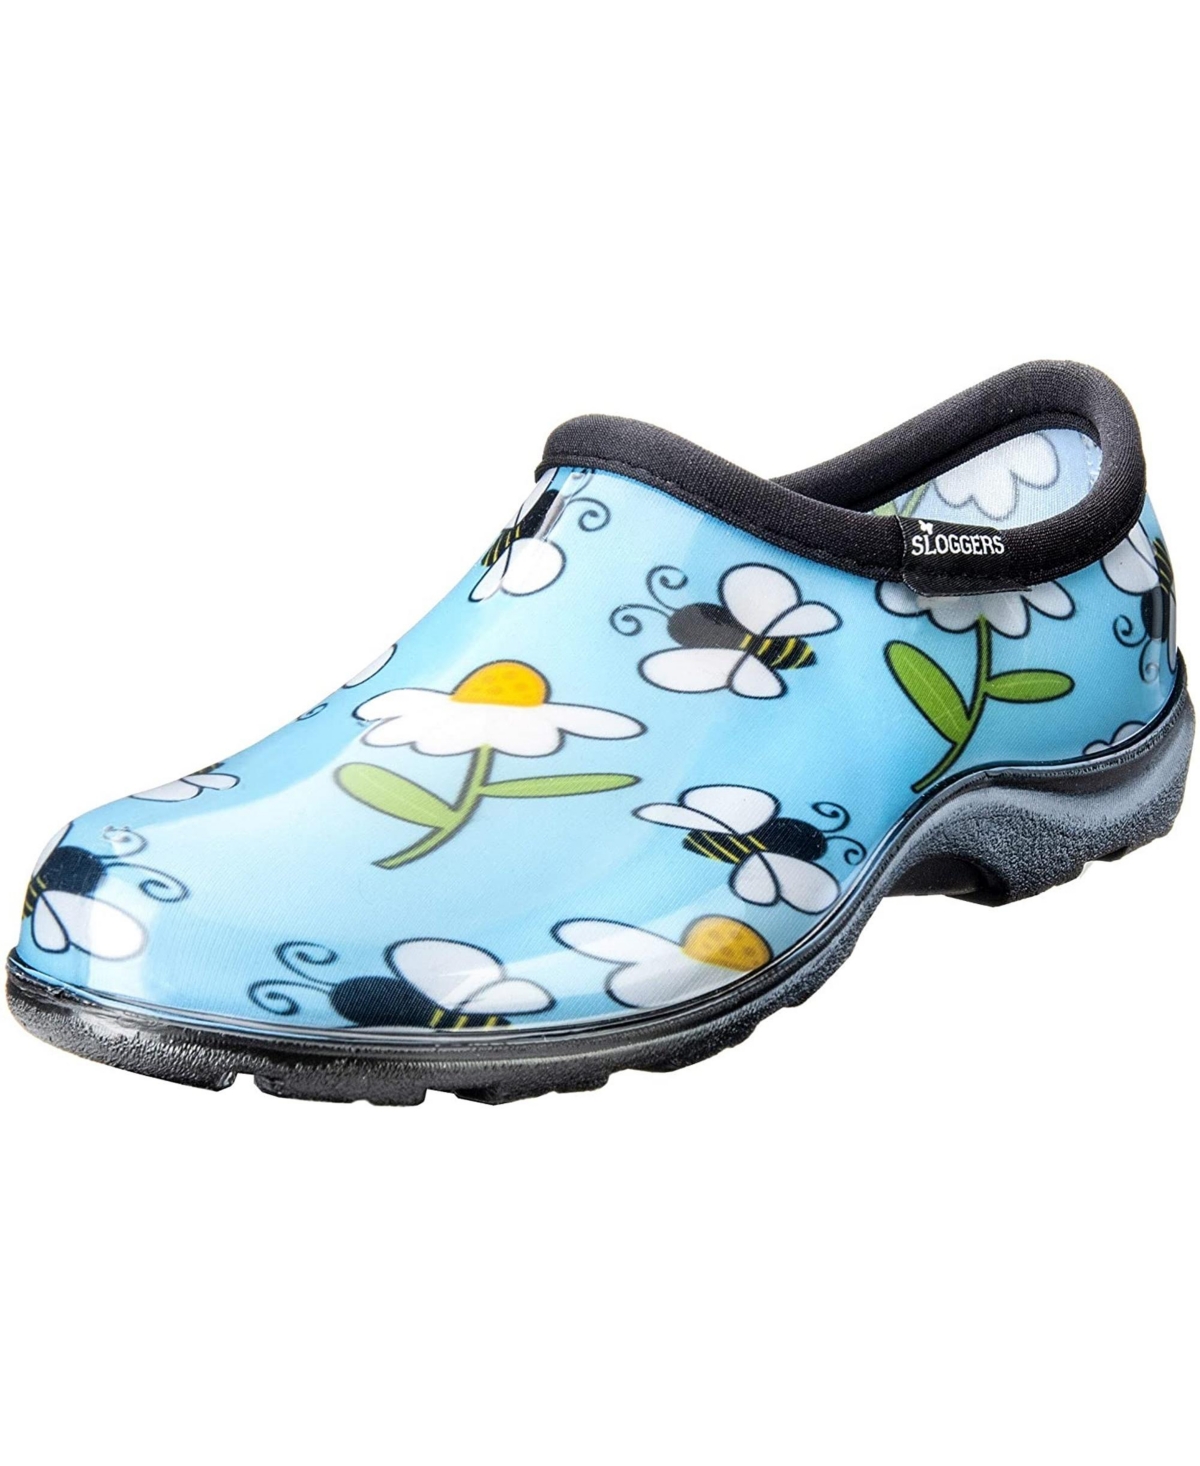 Sloggers Womens Waterproof Comfort Shoes, Blue Bees Print, Size 6 In Multi